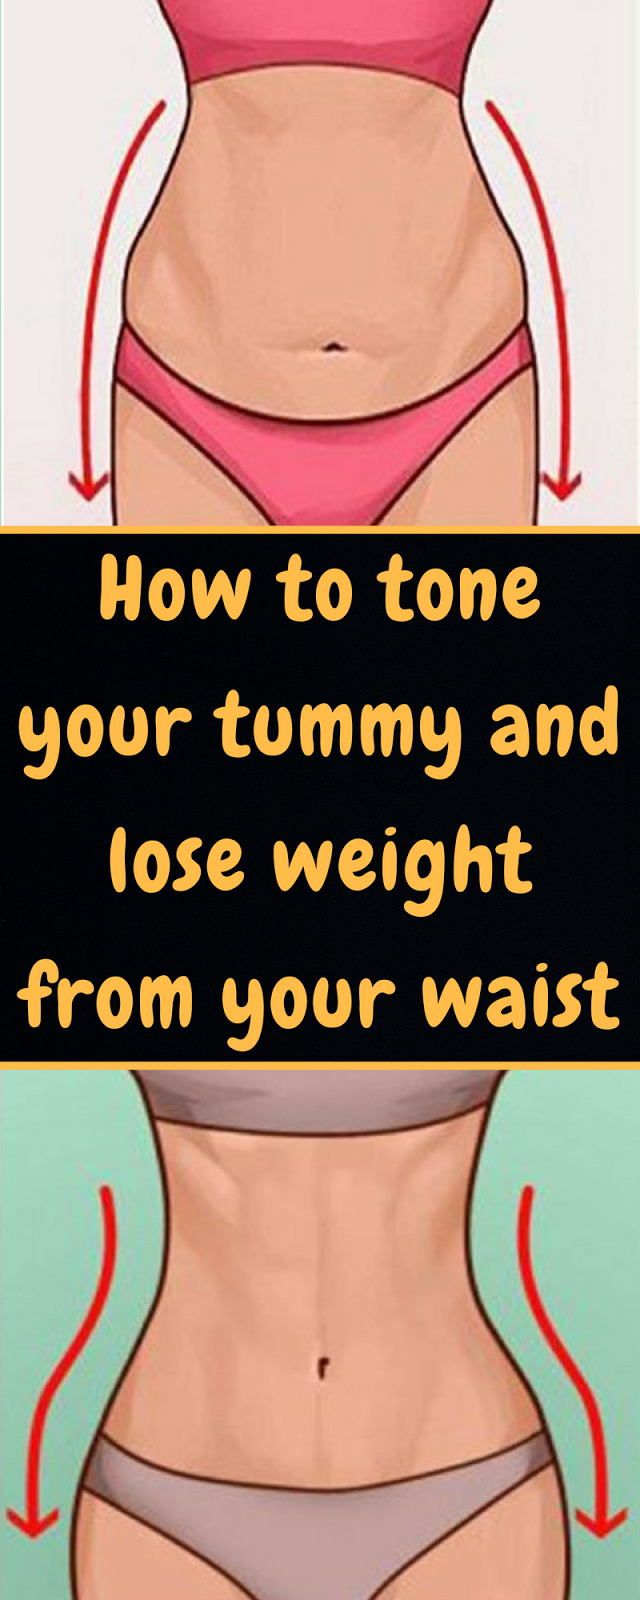 How to tone your tummy and lose weight from your waist